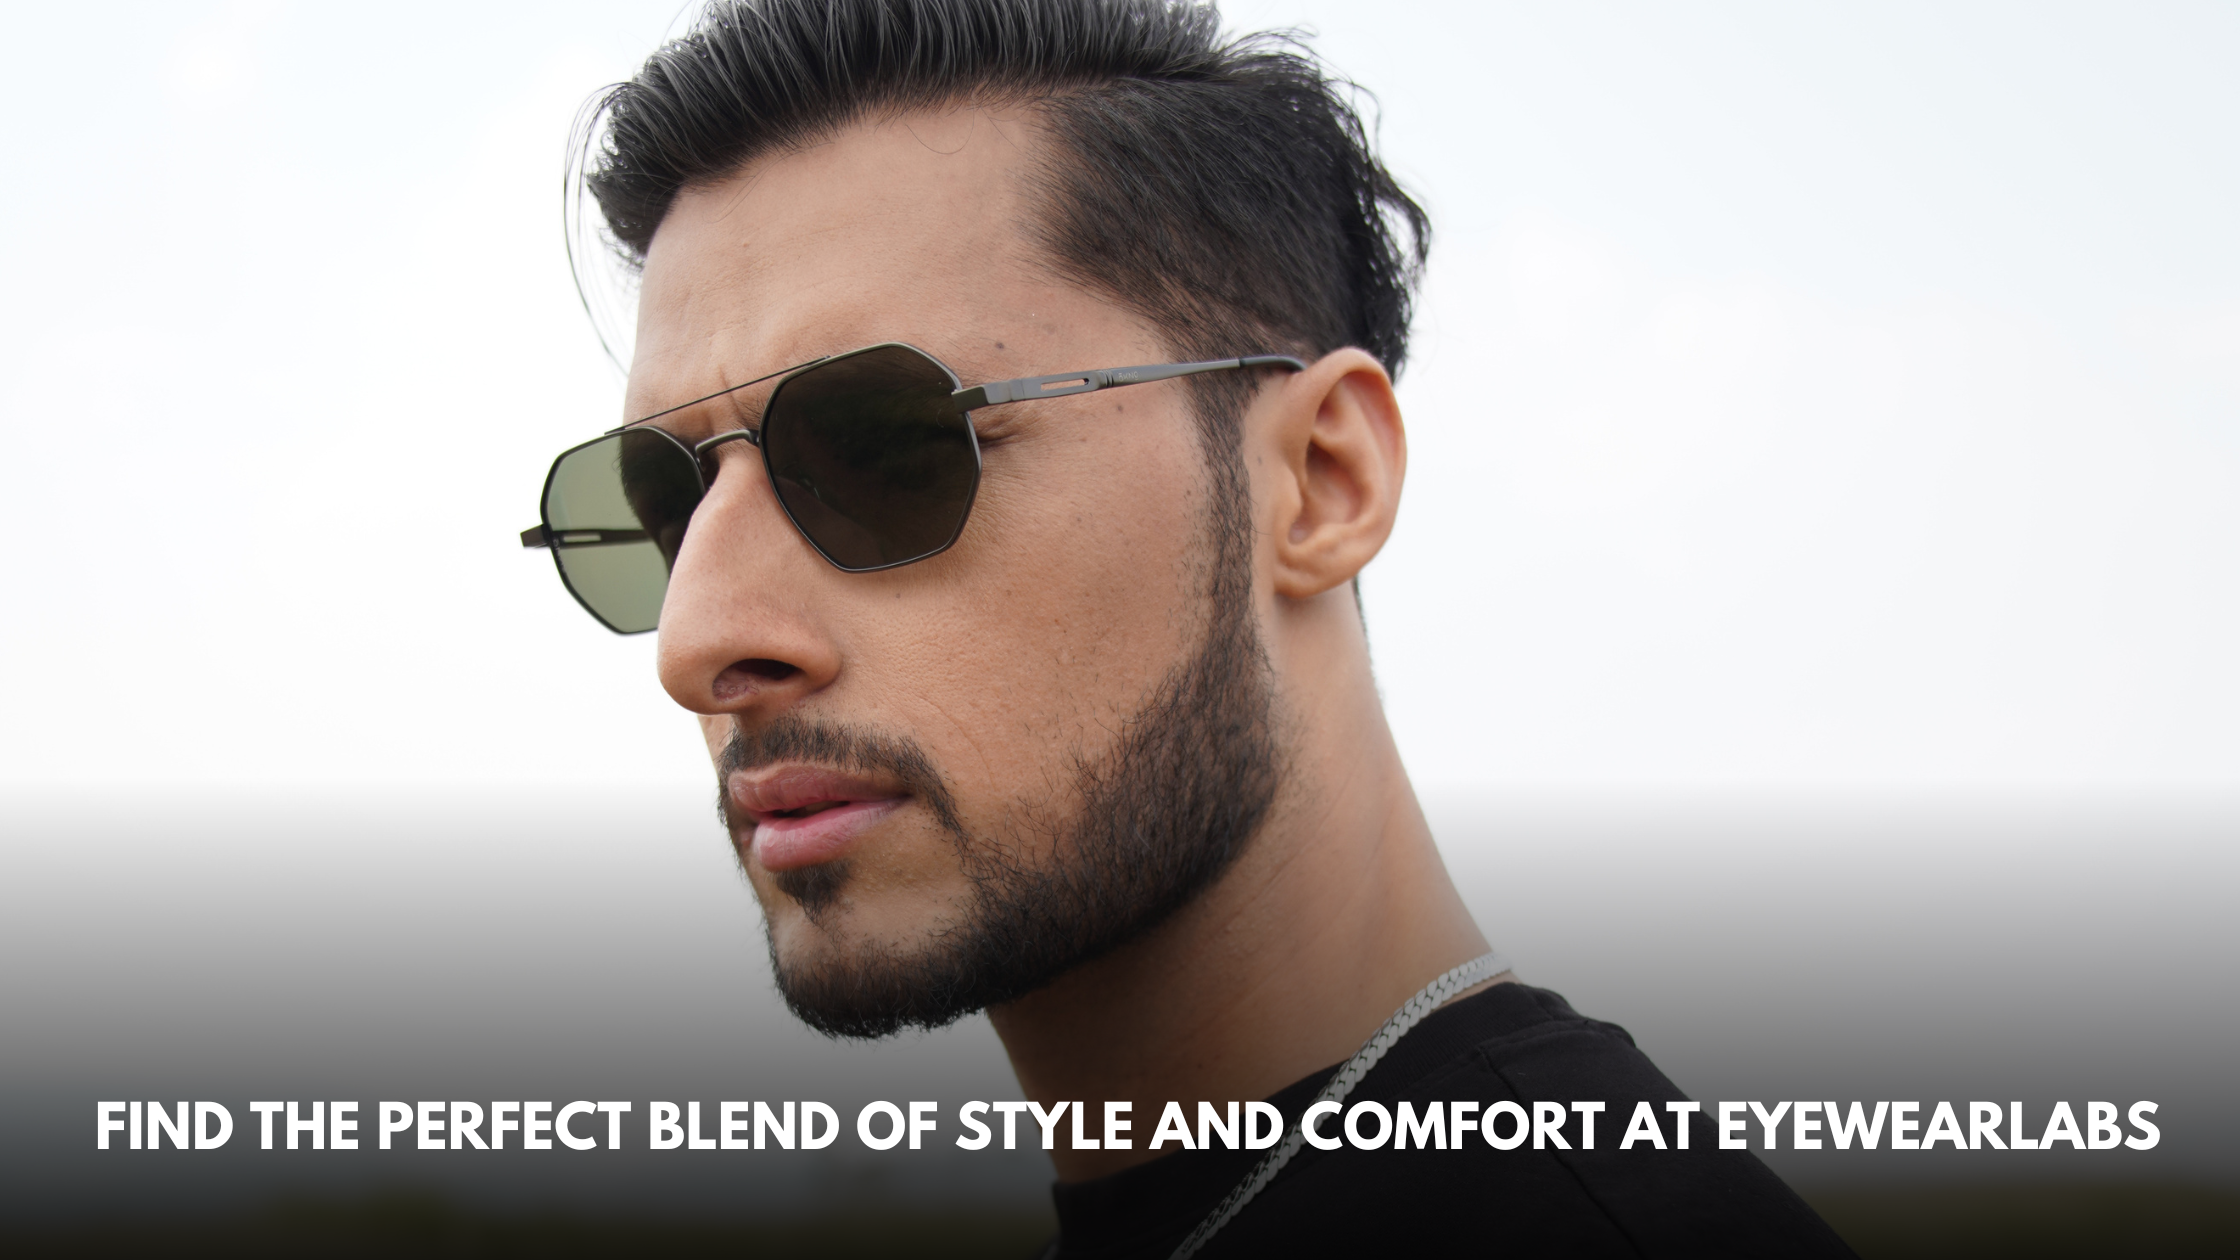 Find the Perfect Blend of Style and Comfort at Eyewearlabs